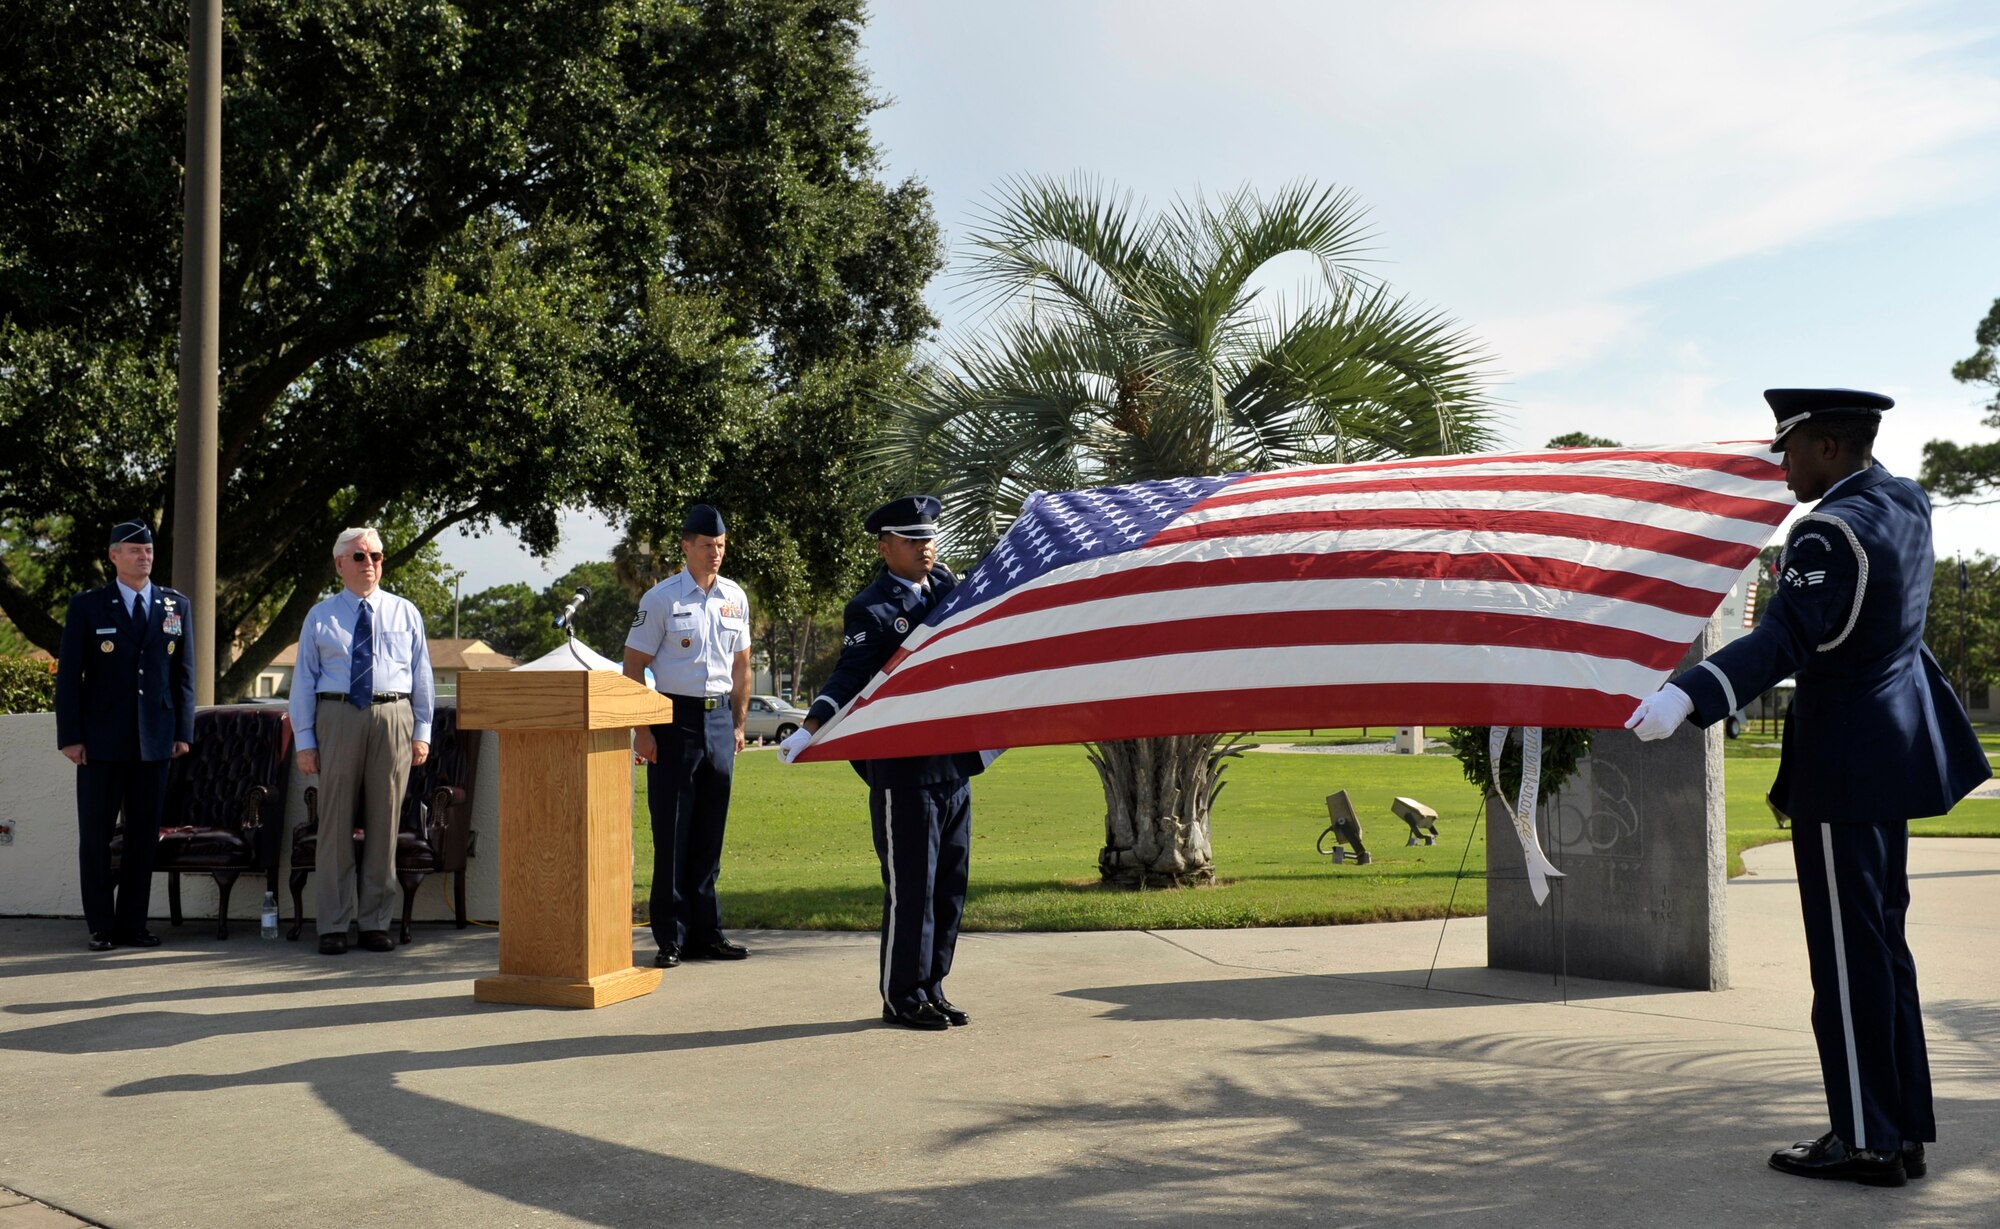 TYNDALL AIR FORCE BASE, Fla. – Tyndall hosted the Prisoner of War/ Missing in Action Ceremony Sept. 18 at Flag Park. The ceremony was conducted directly following the end of a 24-hour relay run. (U.S. Air Force photo courtesy of Jonathan Gibson)